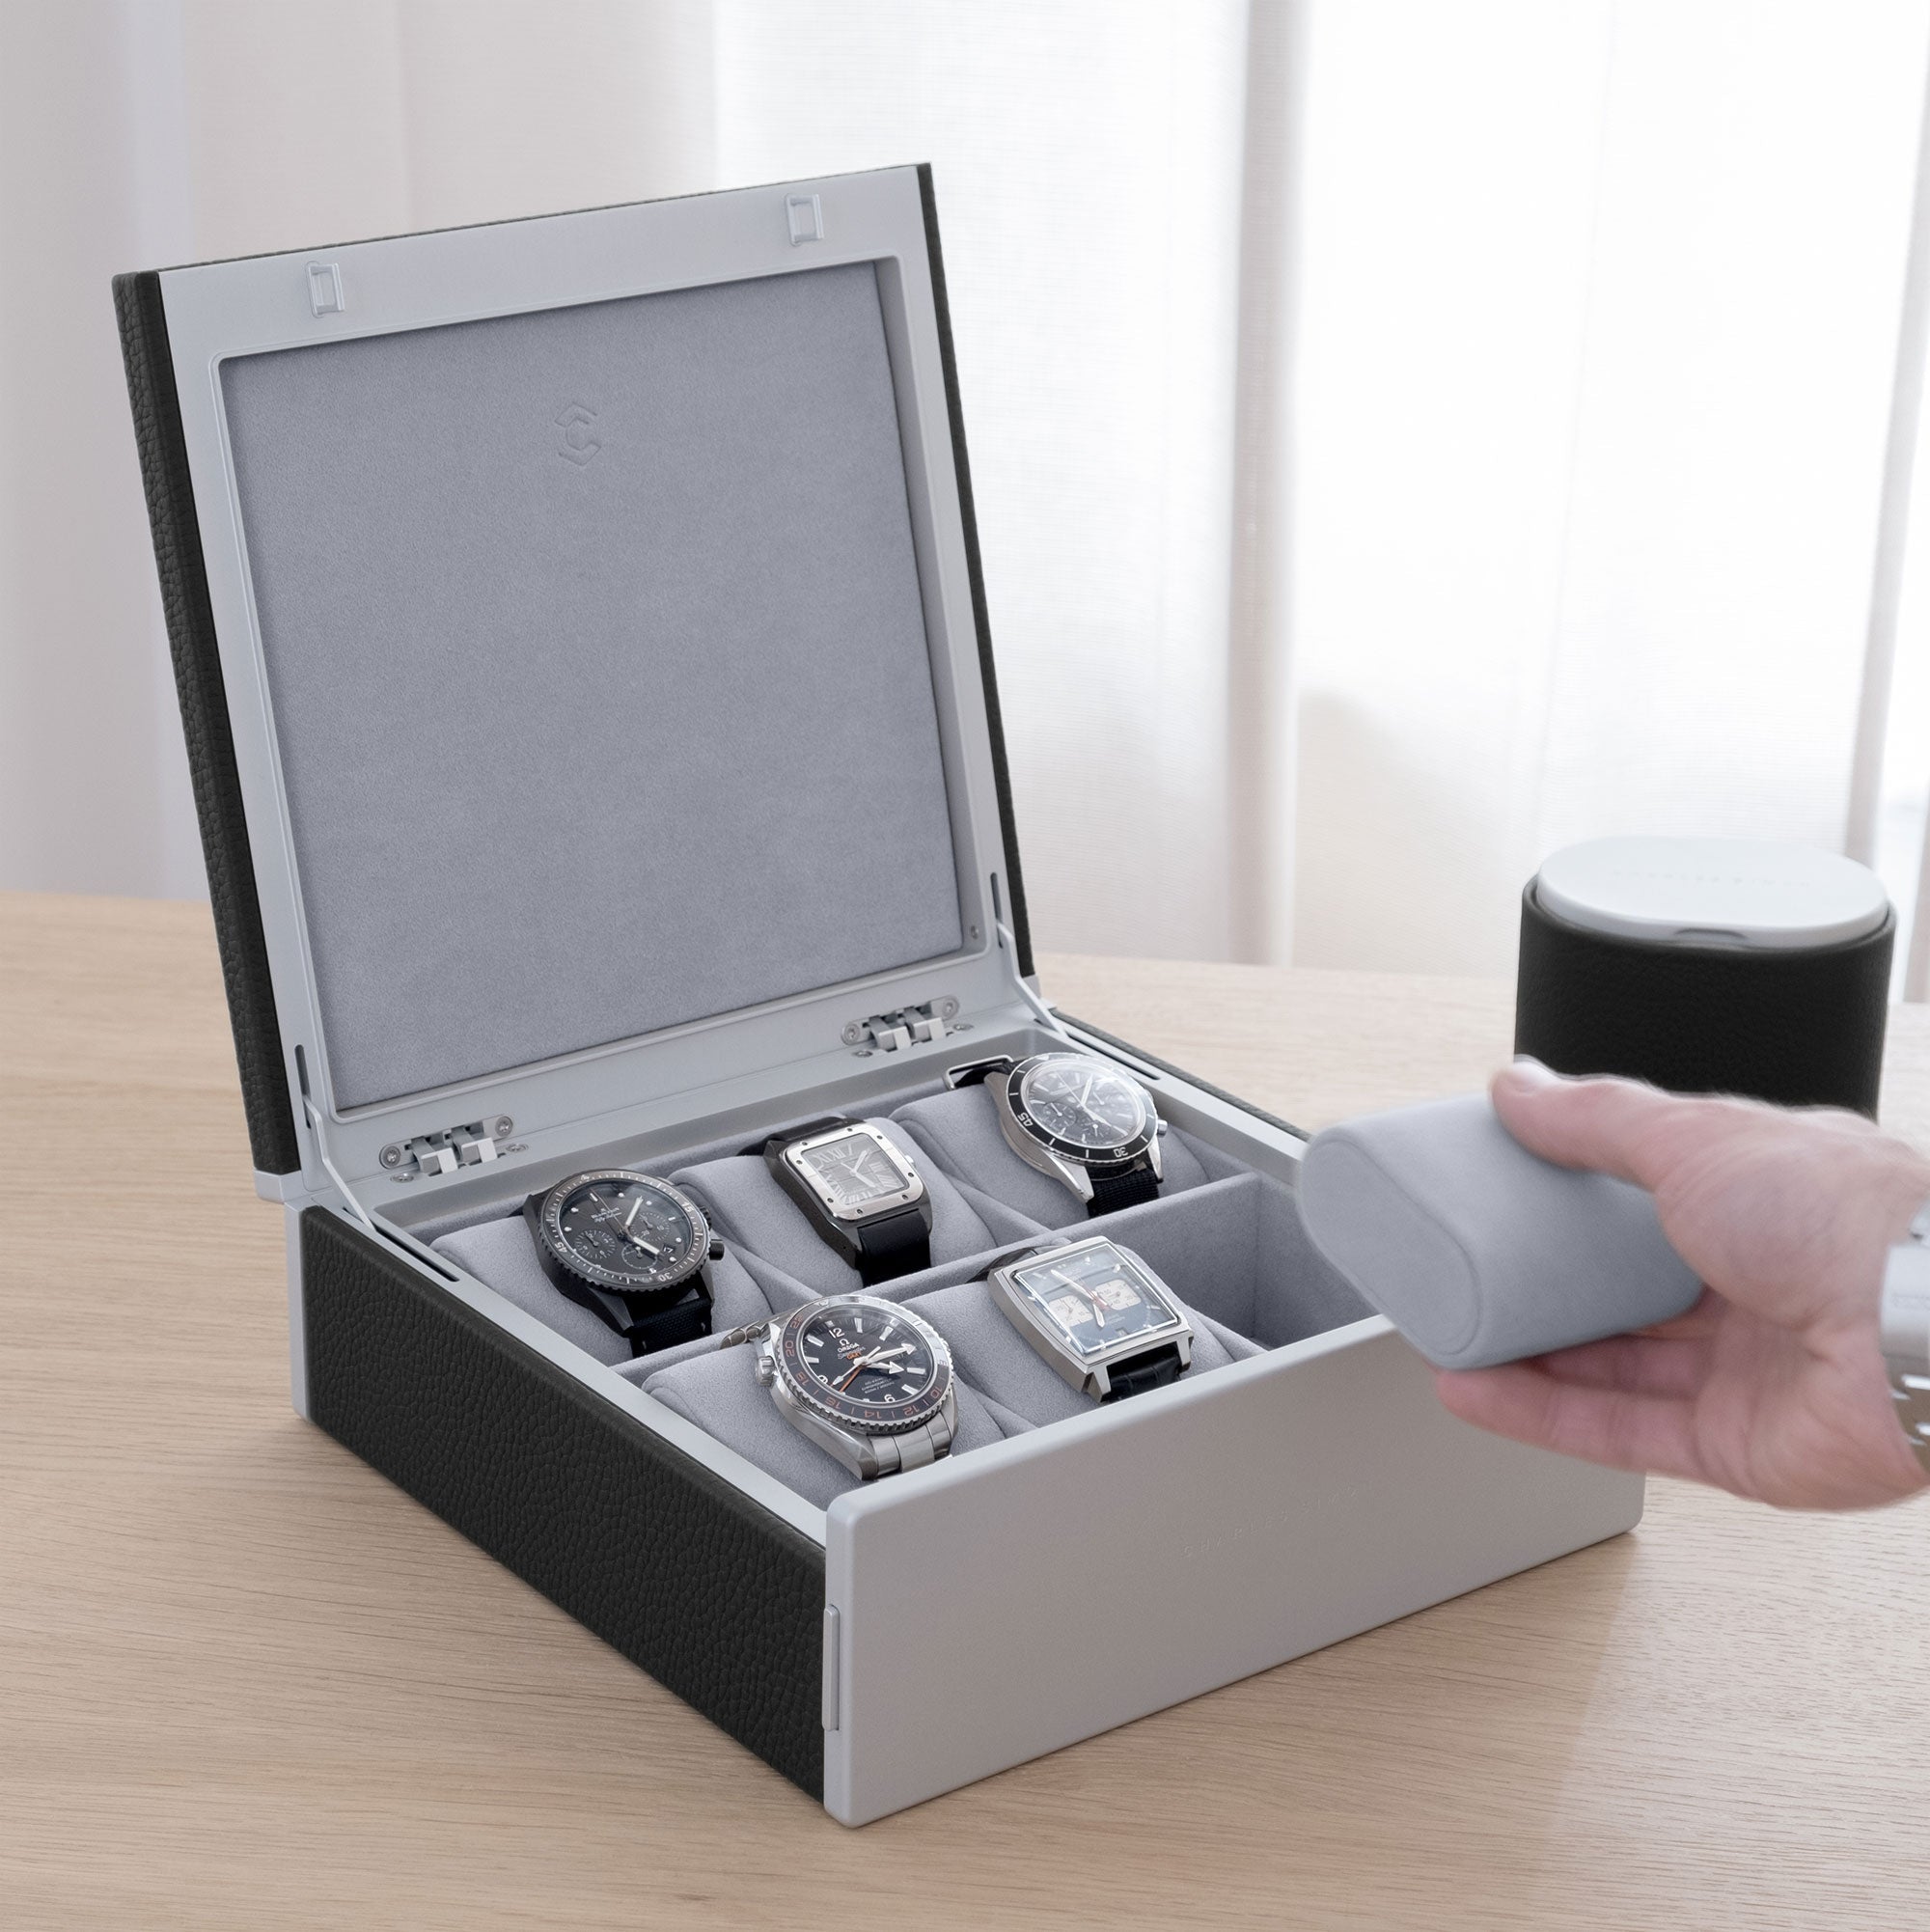 Luxury lifestyle shot of Spence watch box made from black leather for 6 watches filled with men's luxury watches including Rolex, IWC, Jaeger Lecoultre, Cartier and Omega. Gentleman is taking removable fog grey Alcantara cushion from the Spence watch box.